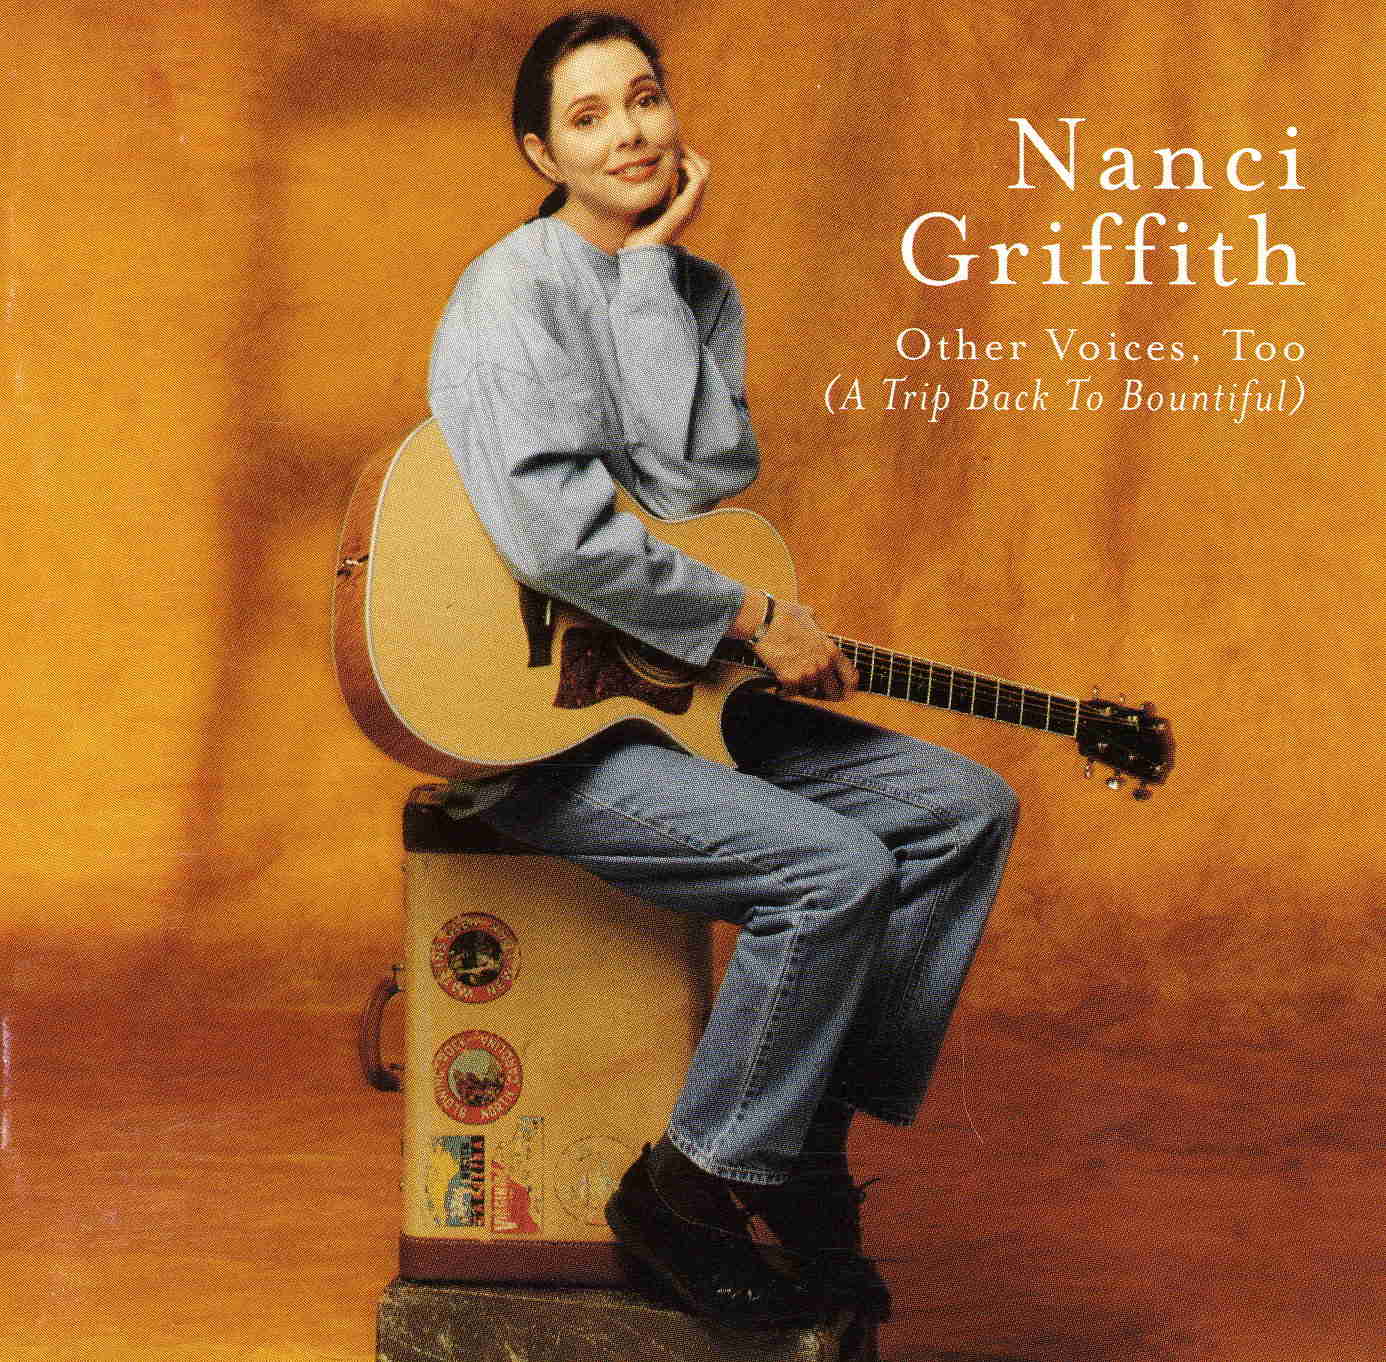 Nanci Griffith Other Voices, Too (A Trip Back To Bountiful) 1998